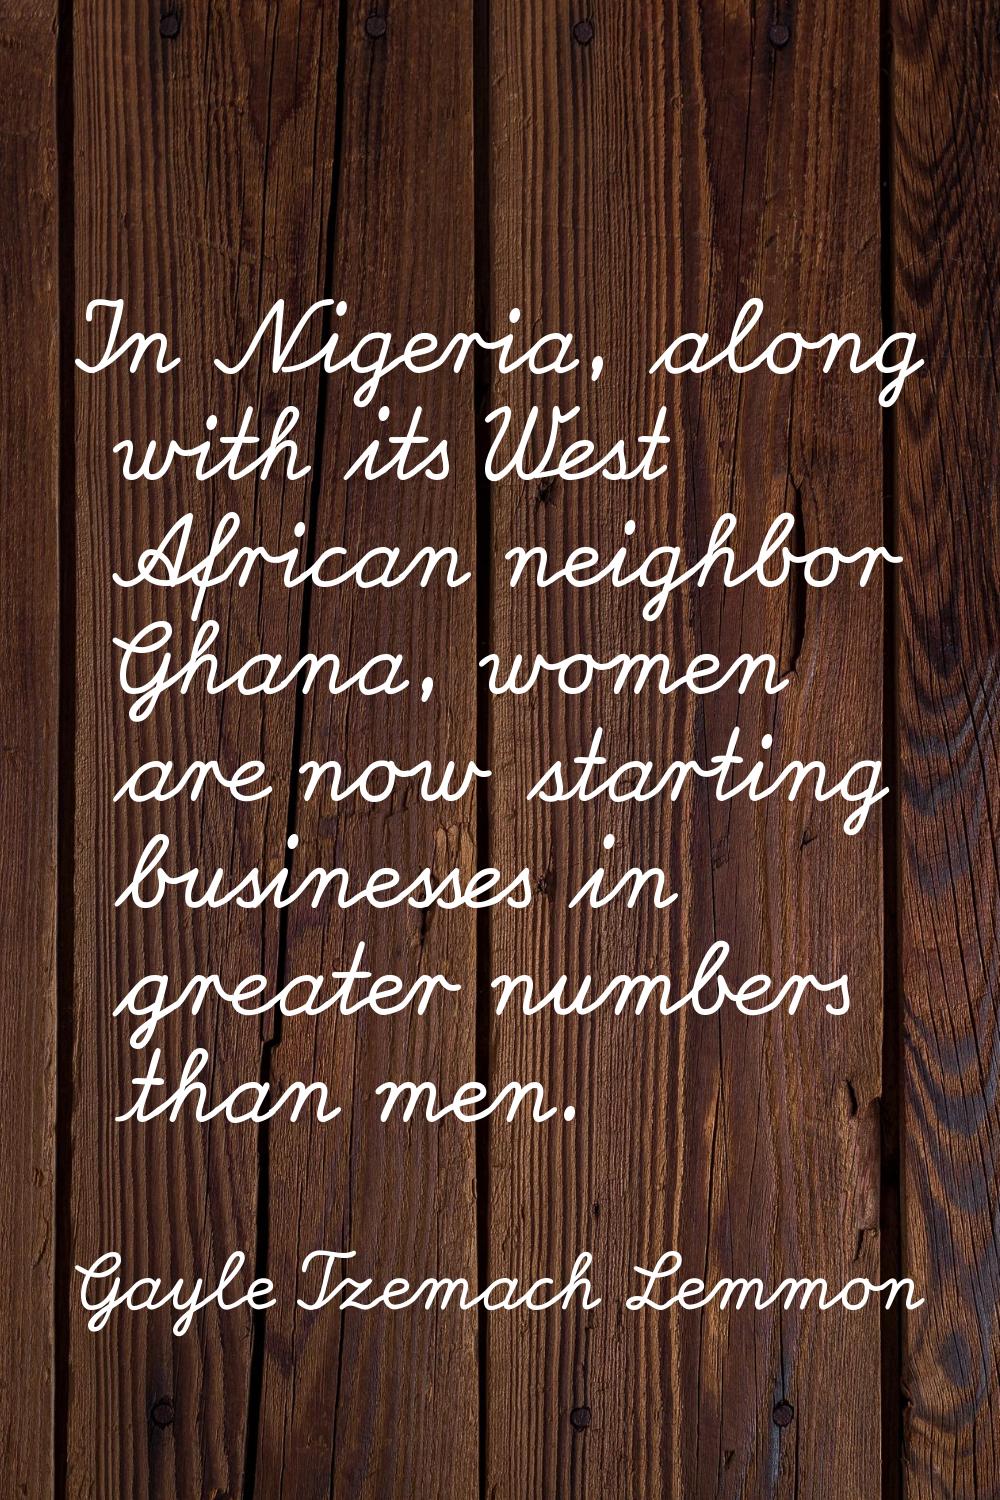 In Nigeria, along with its West African neighbor Ghana, women are now starting businesses in greate